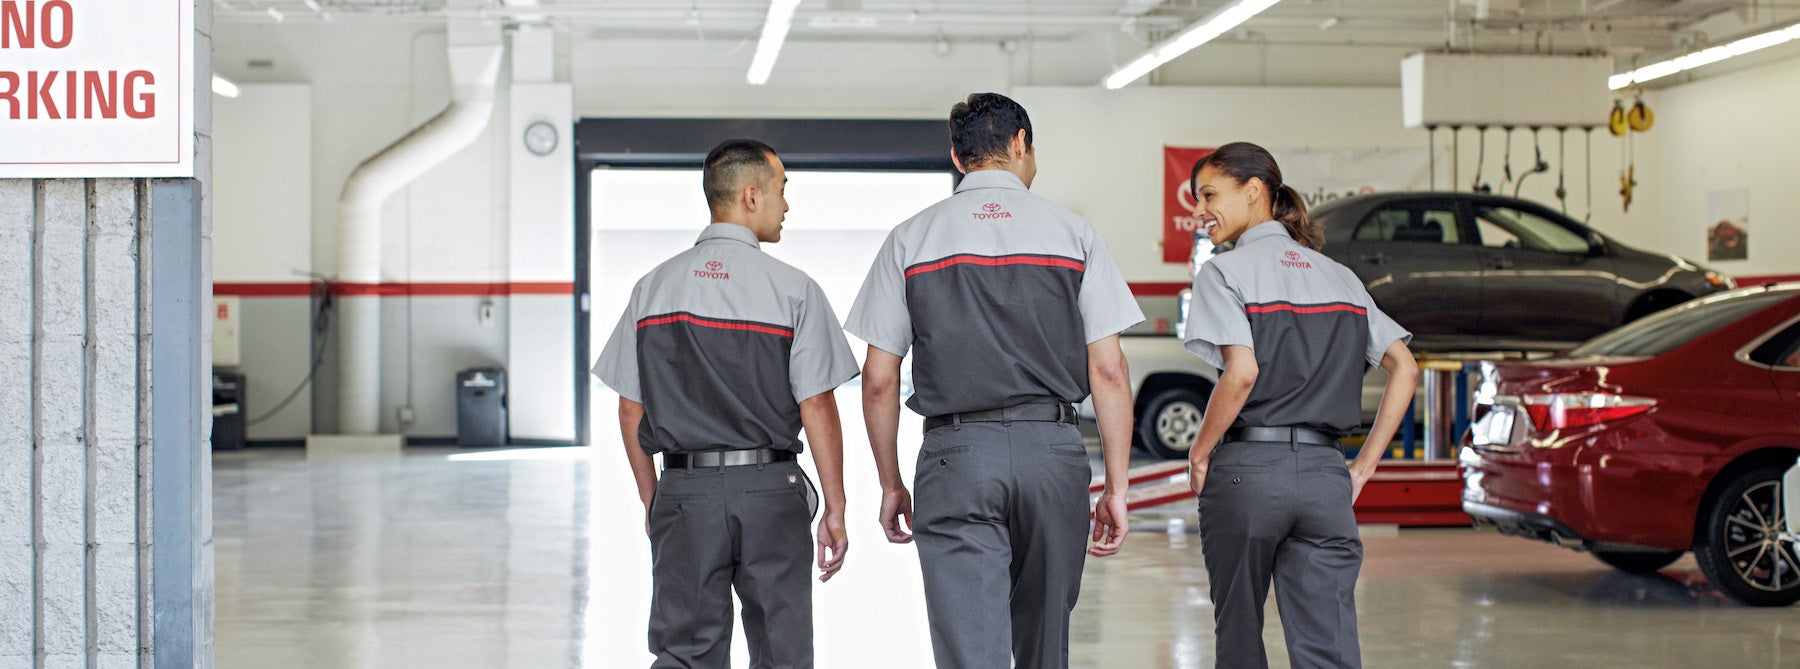 How to check your tires' health at Fiore Toyota of Hollidaysburg | Technician walkign towards toyota service center